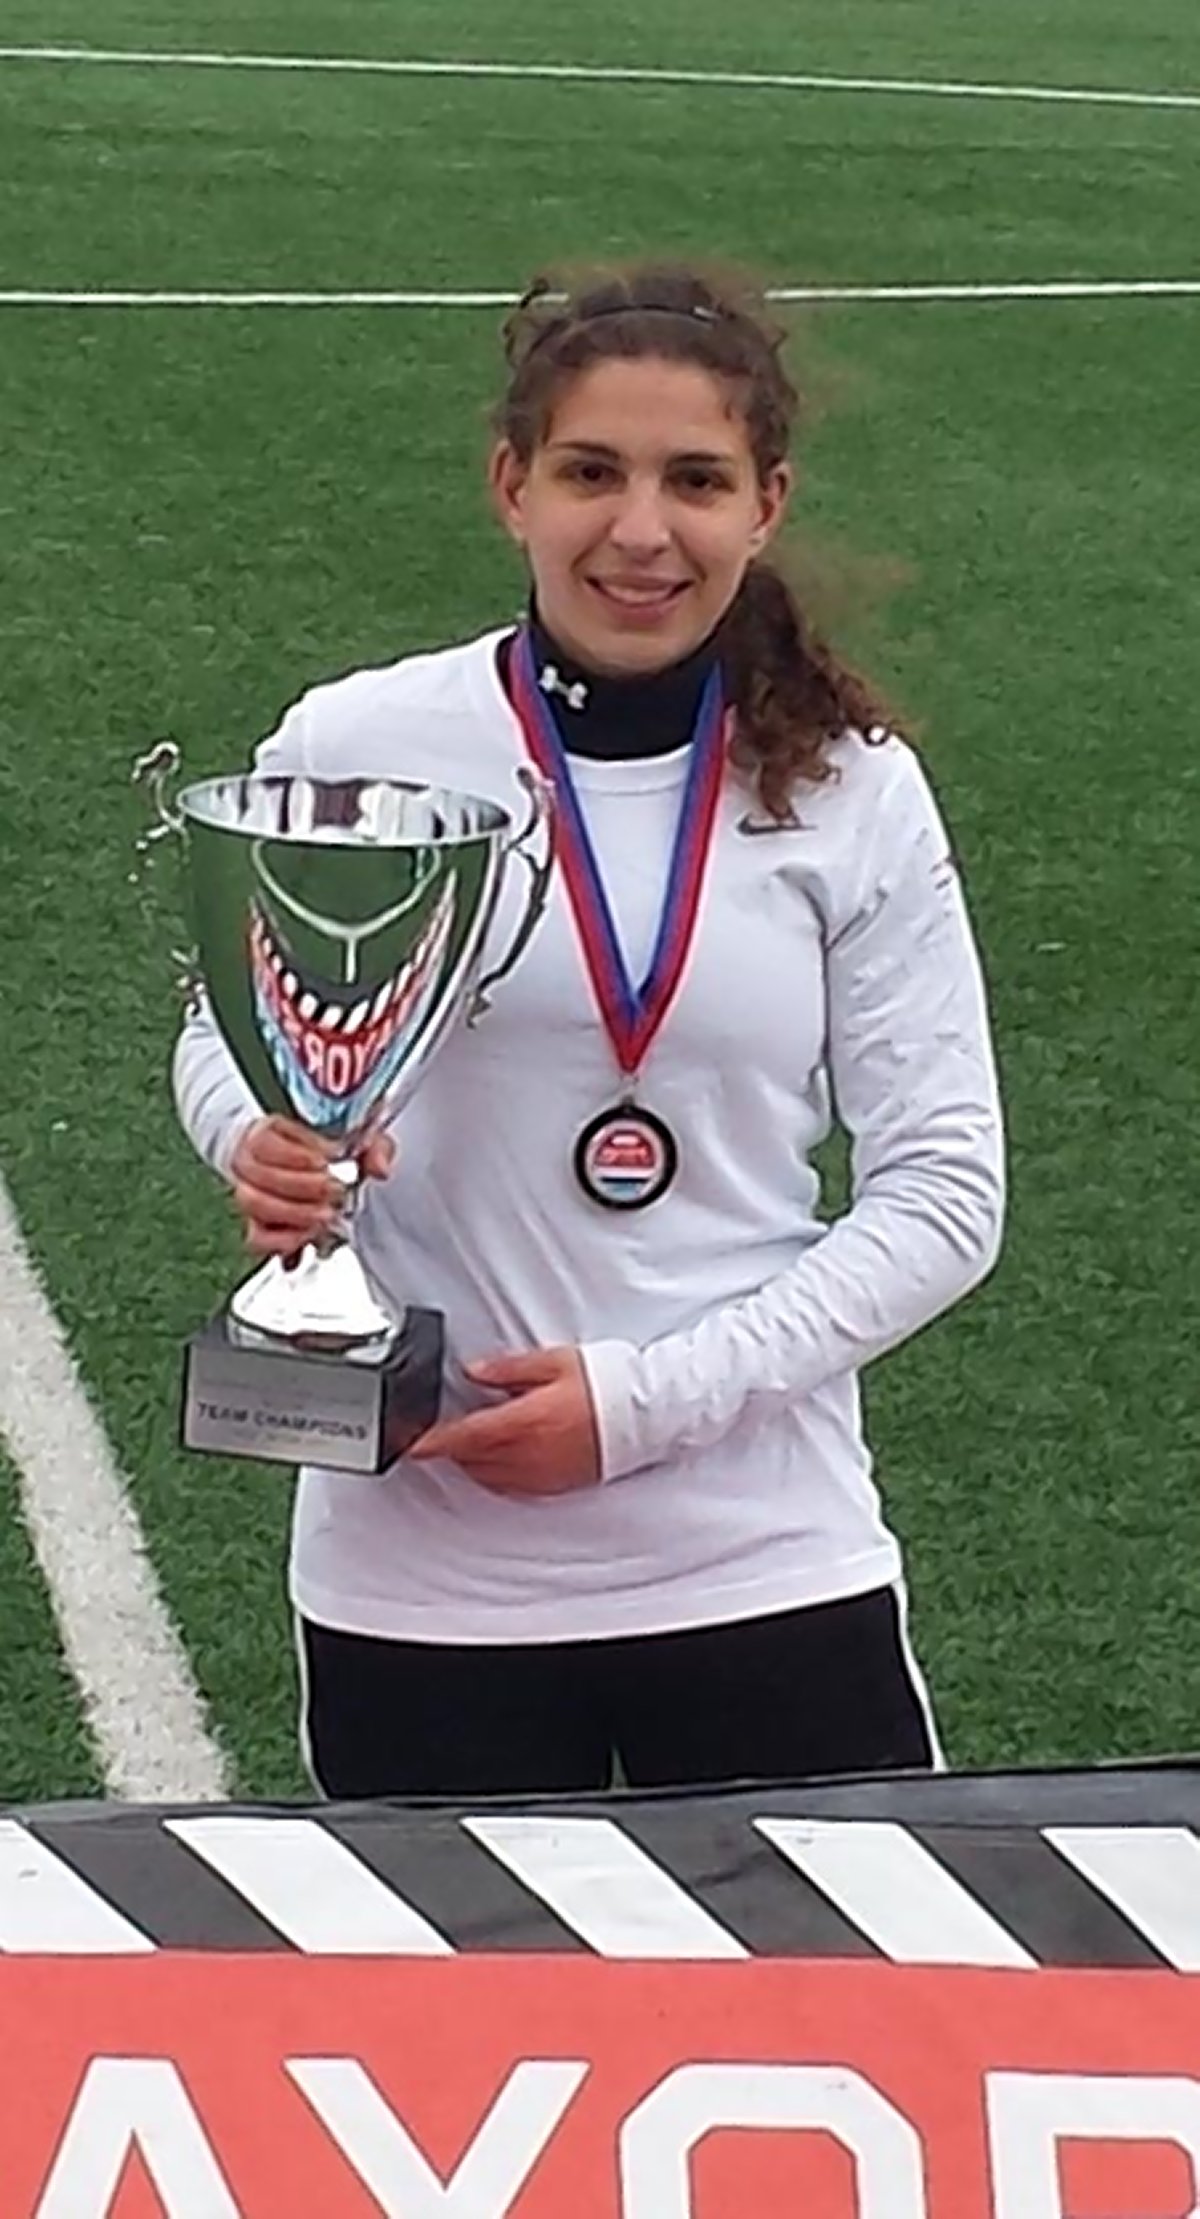 Daniela Zirpolo after the Mayor’s Cup Soccer Championship at St. John’s University, holding the trophy given to the winning team.